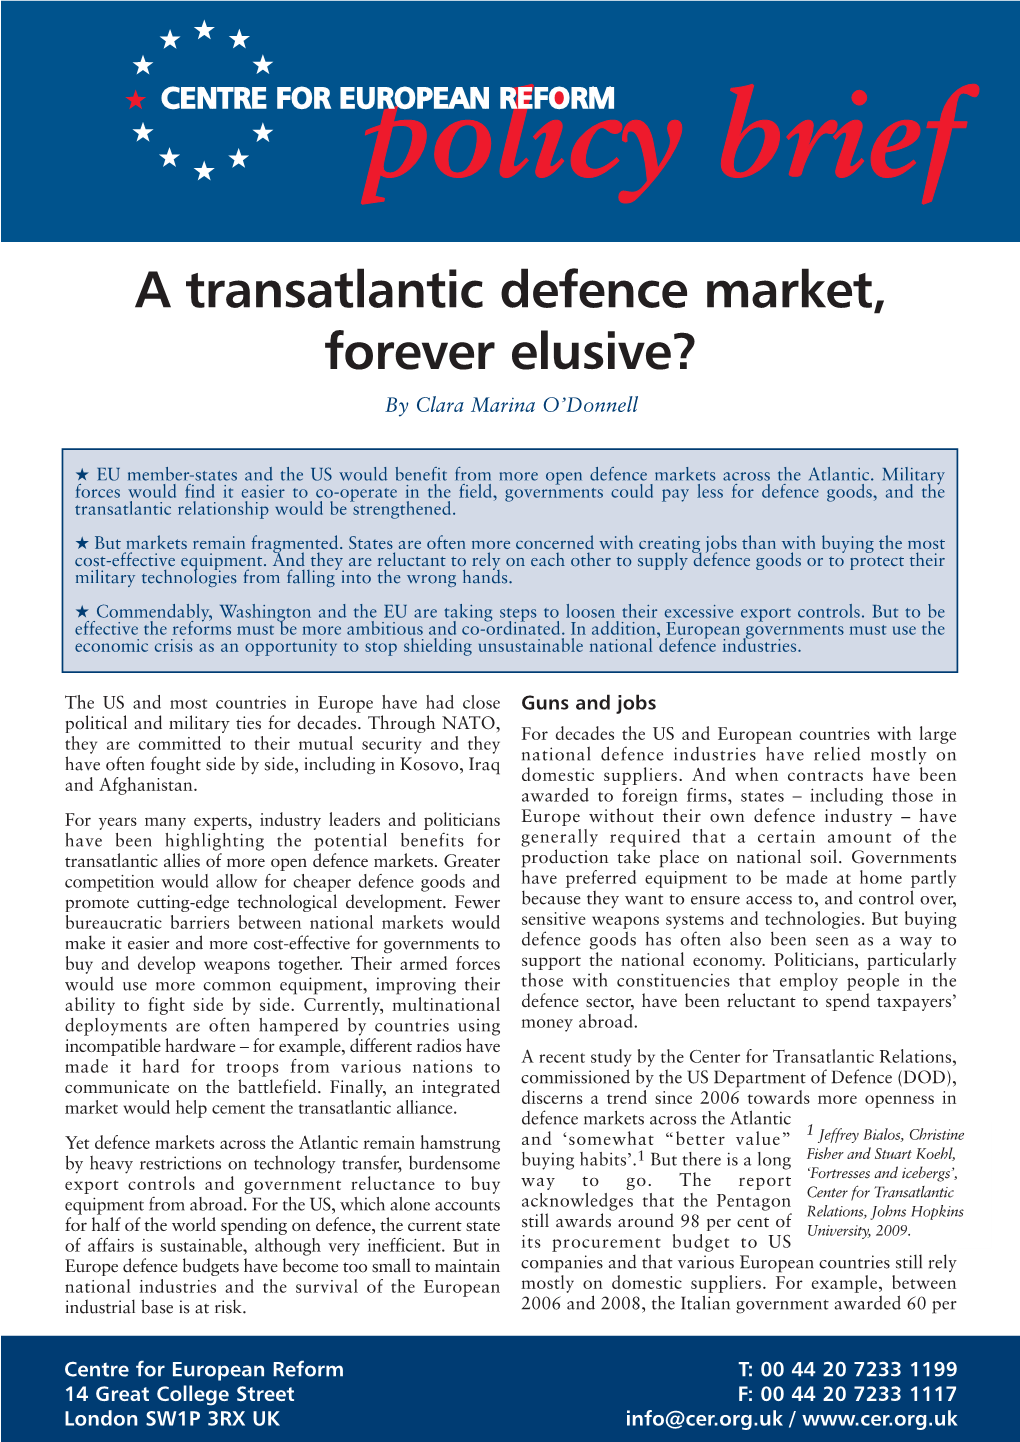 A Transatlantic Defence Market, Forever Elusive? by Clara Marina O’Donnell